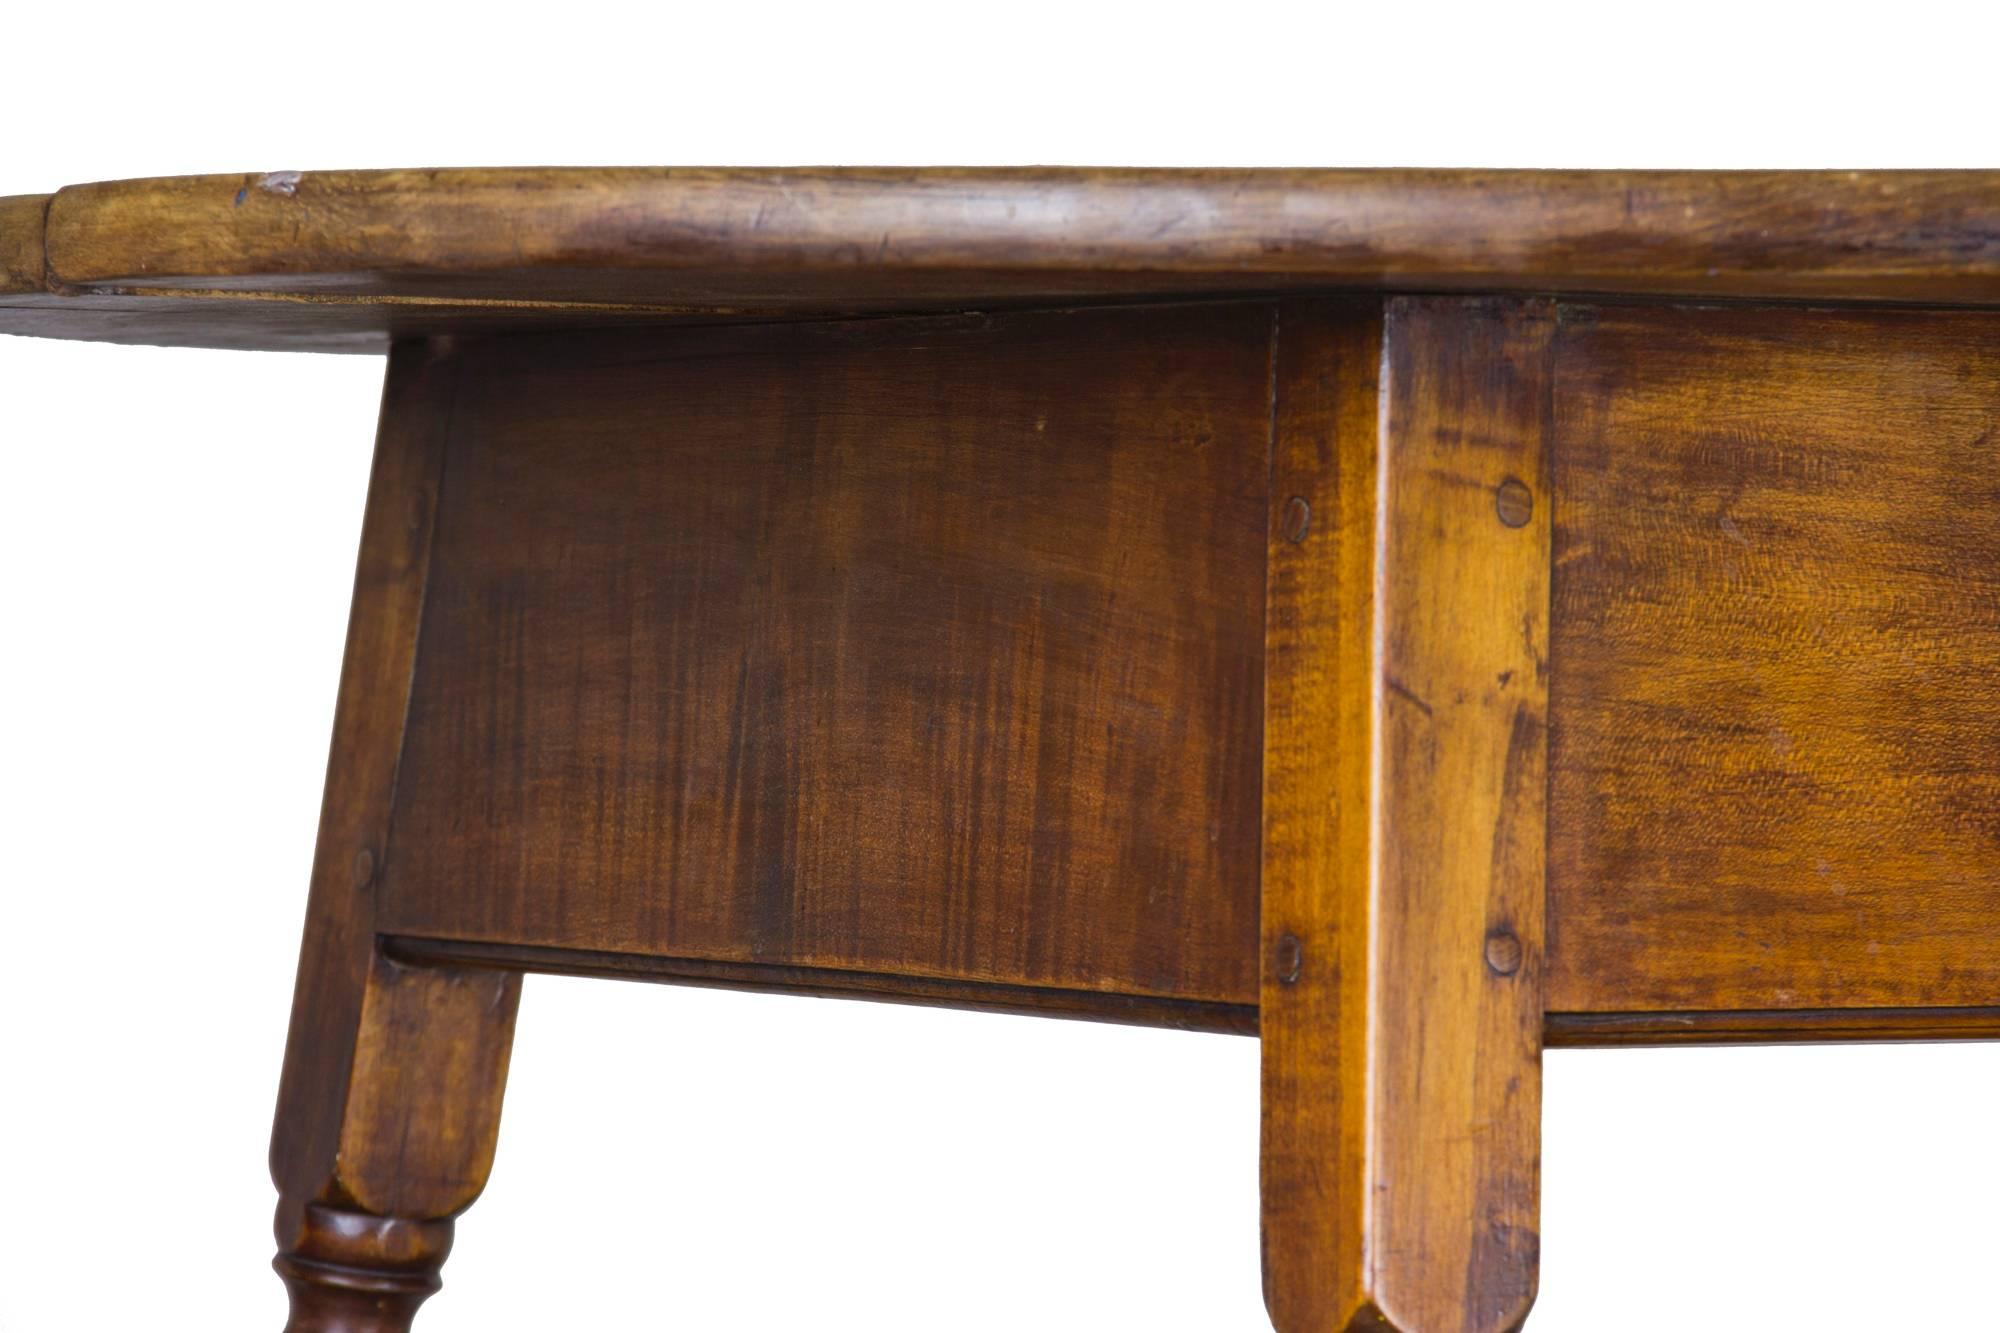 Large Figured Maple Oval Top Tavern Table, Probably CT, Splayed Legs, circa 1760 For Sale 2